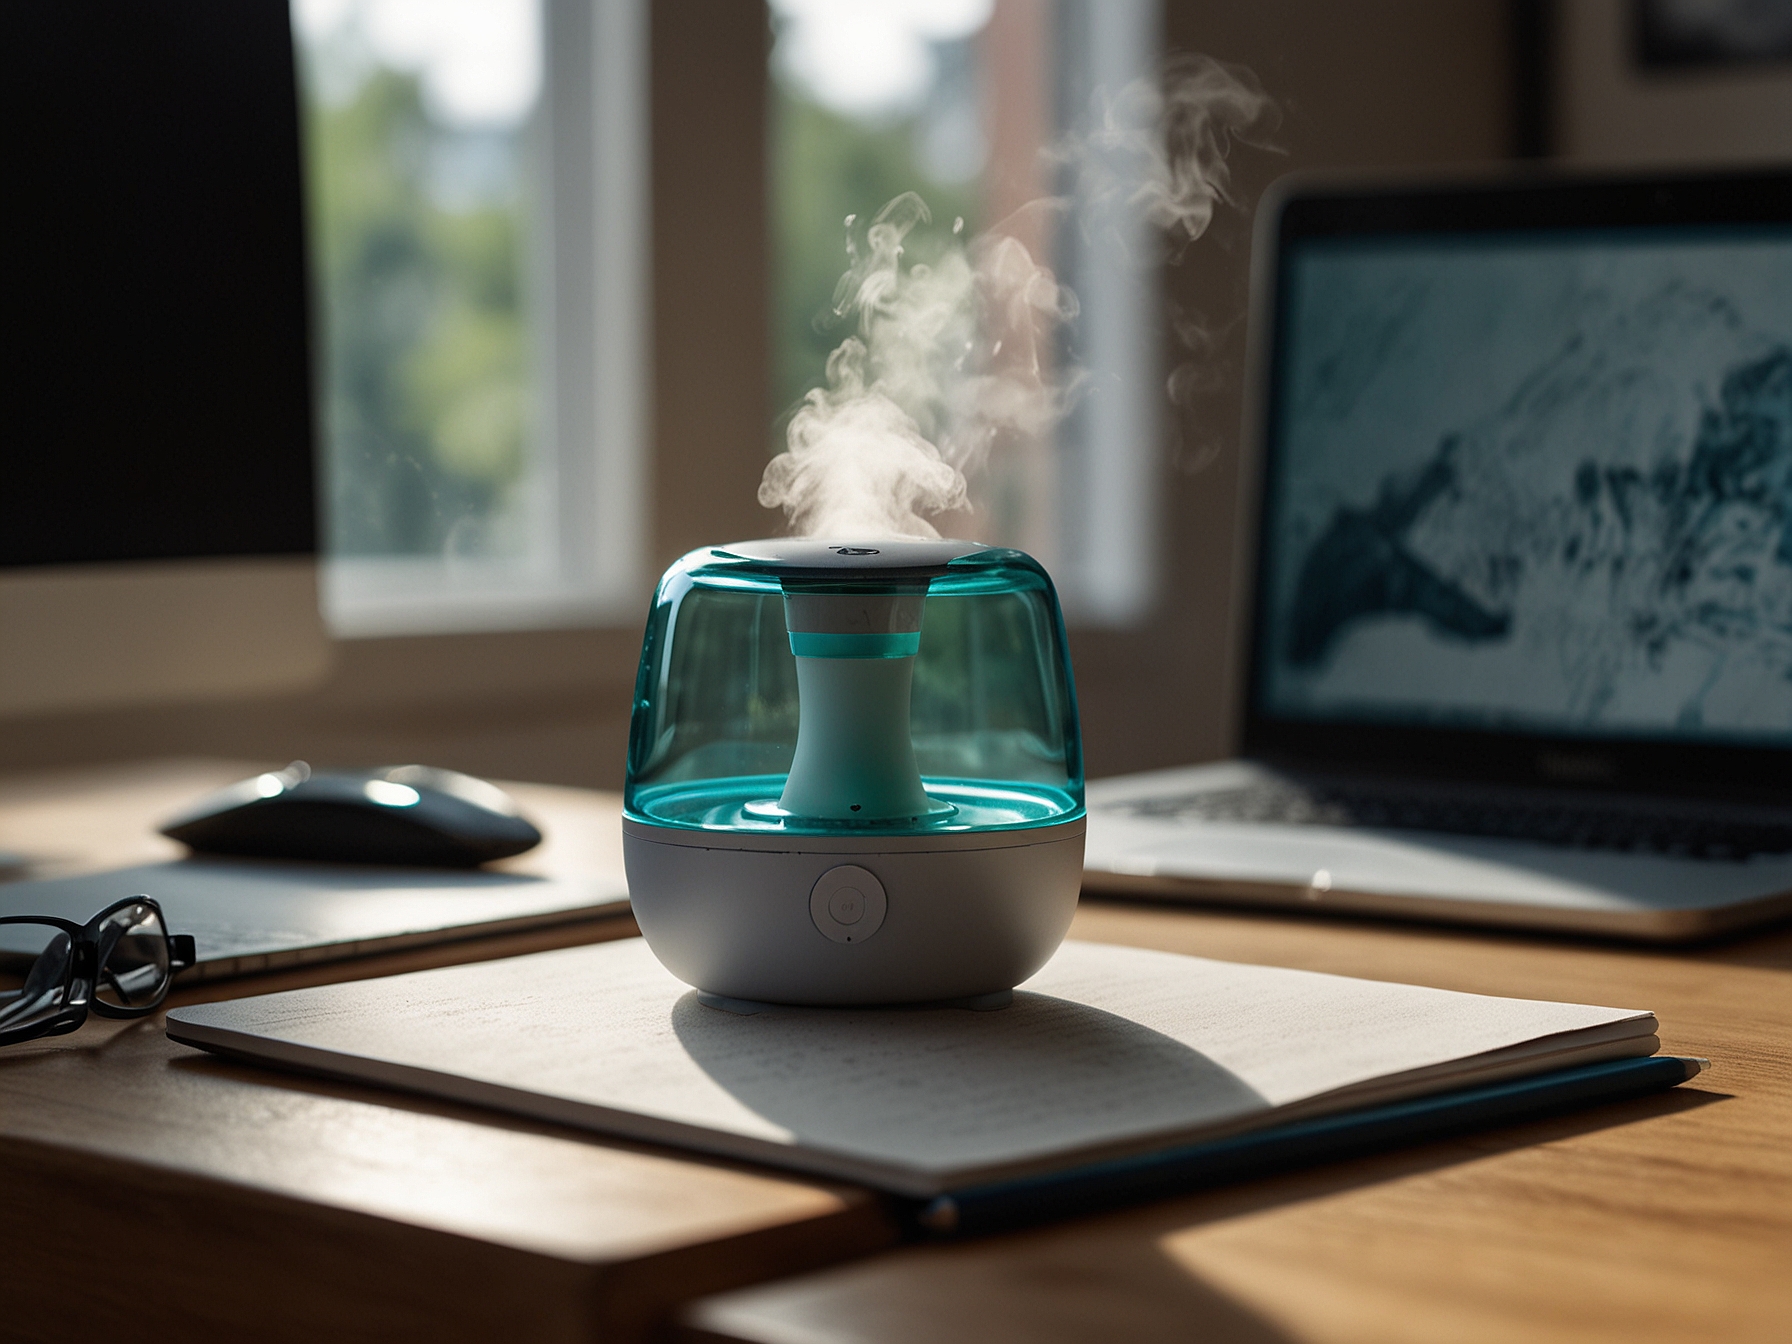 A desktop setting featuring a compact humidifier like the Vicks Mini Filter-Free Cool Mist Humidifier, placed next to a laptop on a work desk, illustrating its suitability for smaller personal spaces.